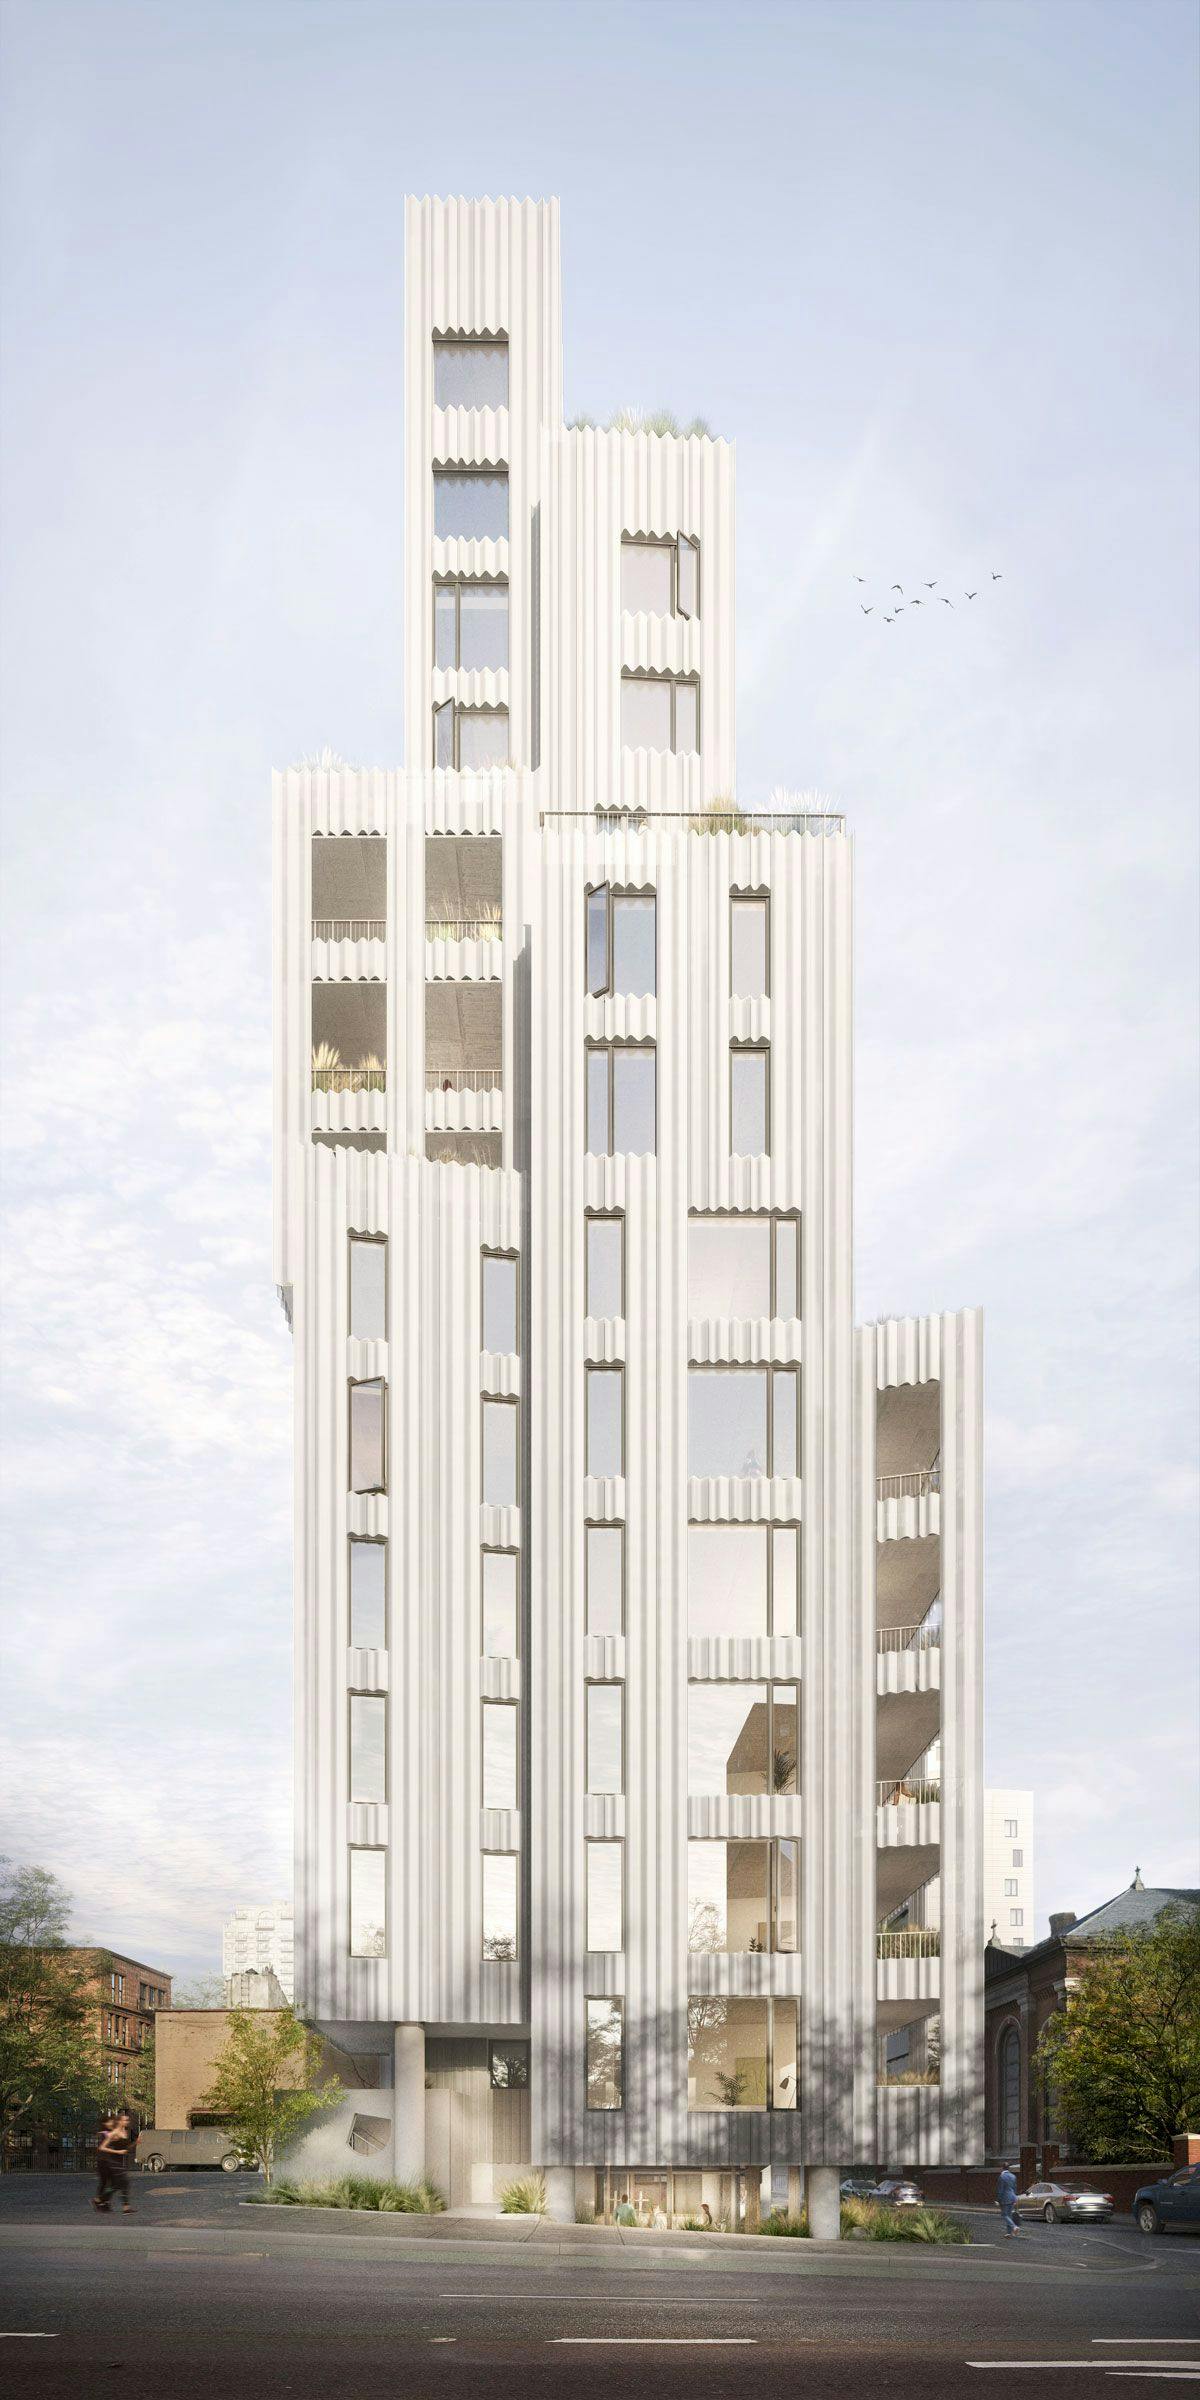 Publication Image for New York’s Newest Condos Prioritize Privacy